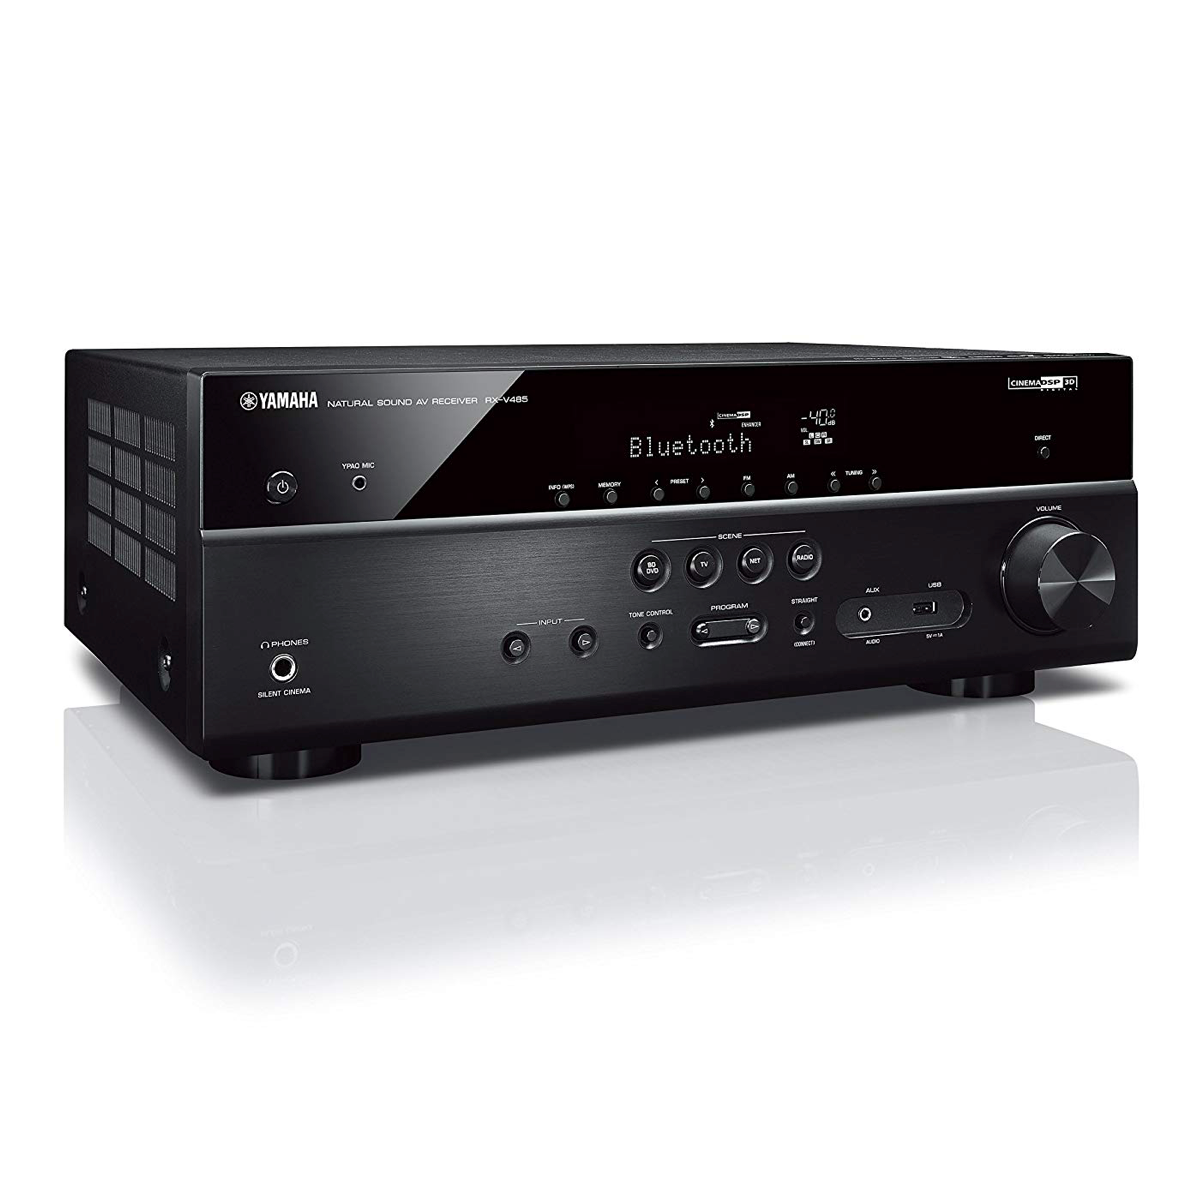 29++ Yamaha 51 amplifier price in india info